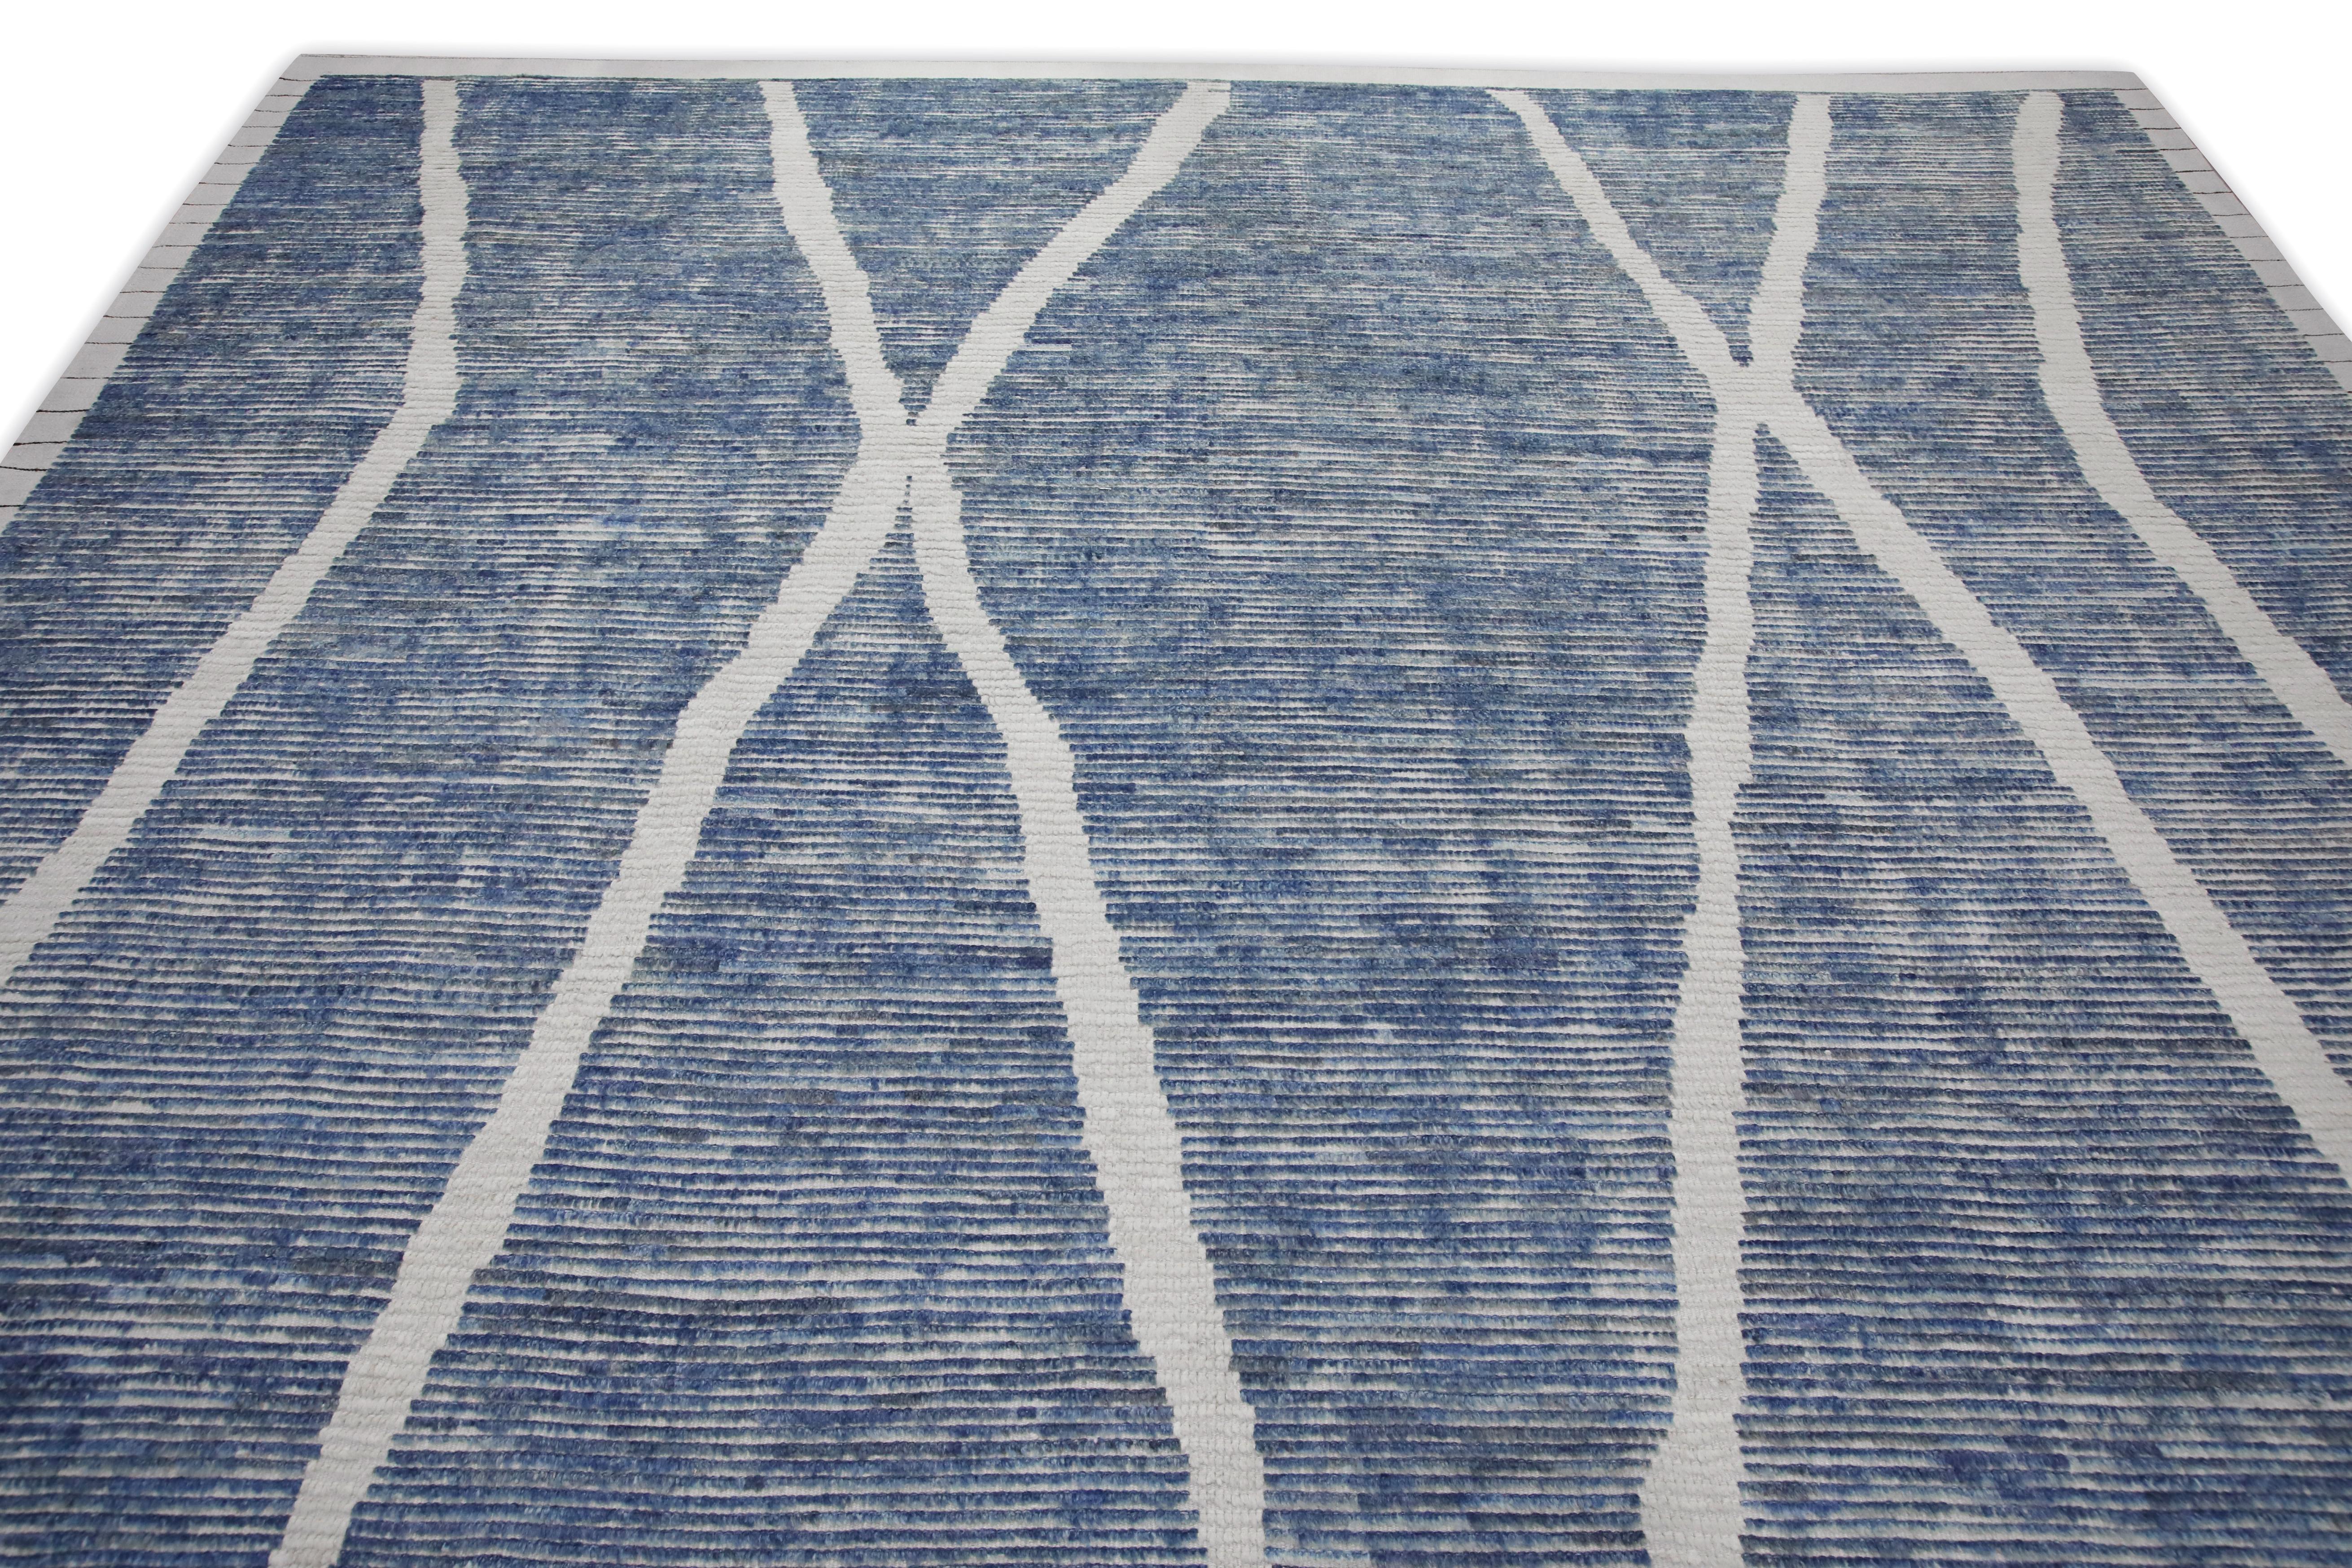 Vegetable Dyed Blue & White 21st Century Modern Moroccan Style Wool Rug 9'9